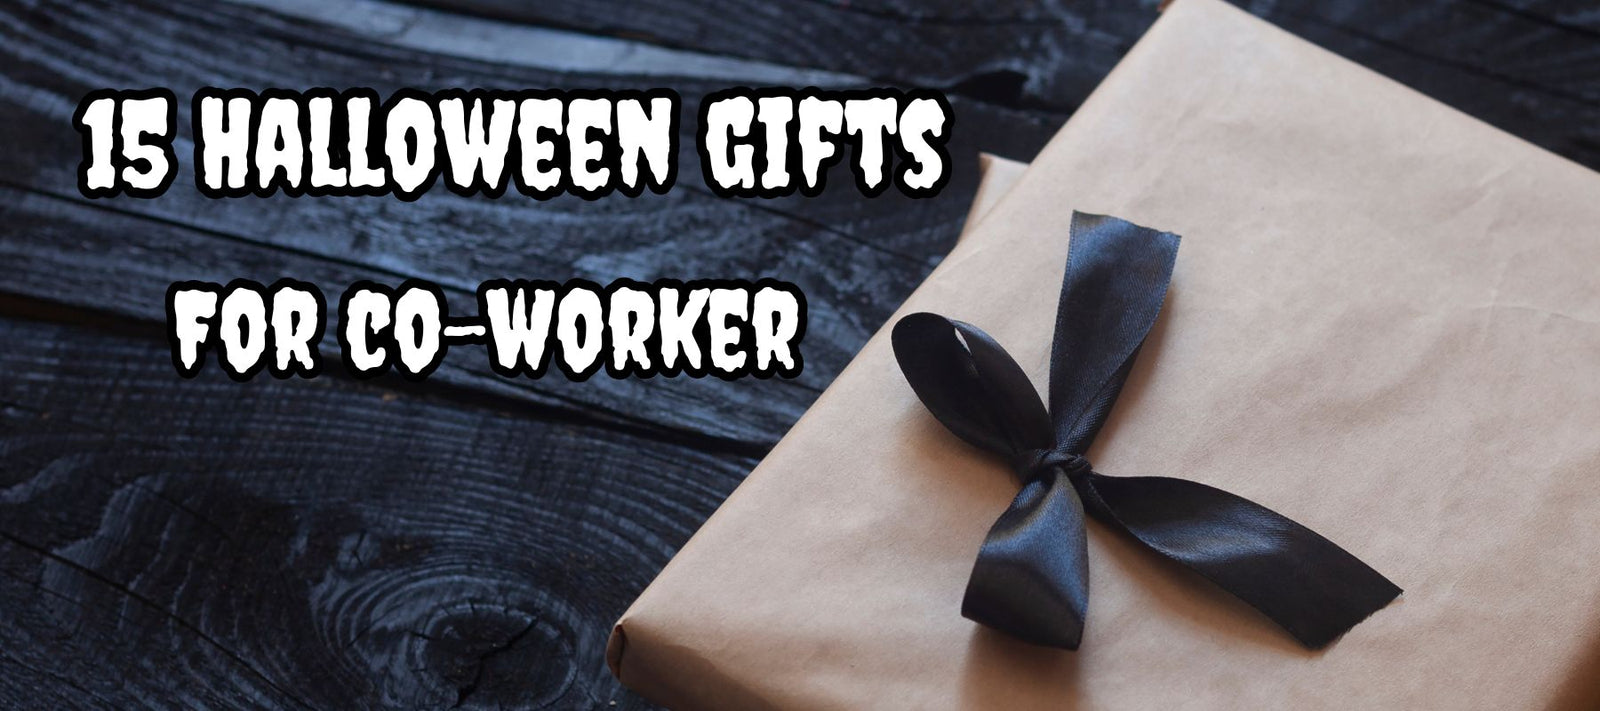 20+ Best Corporate Gift Ideas for Employees - Blueberry Ink